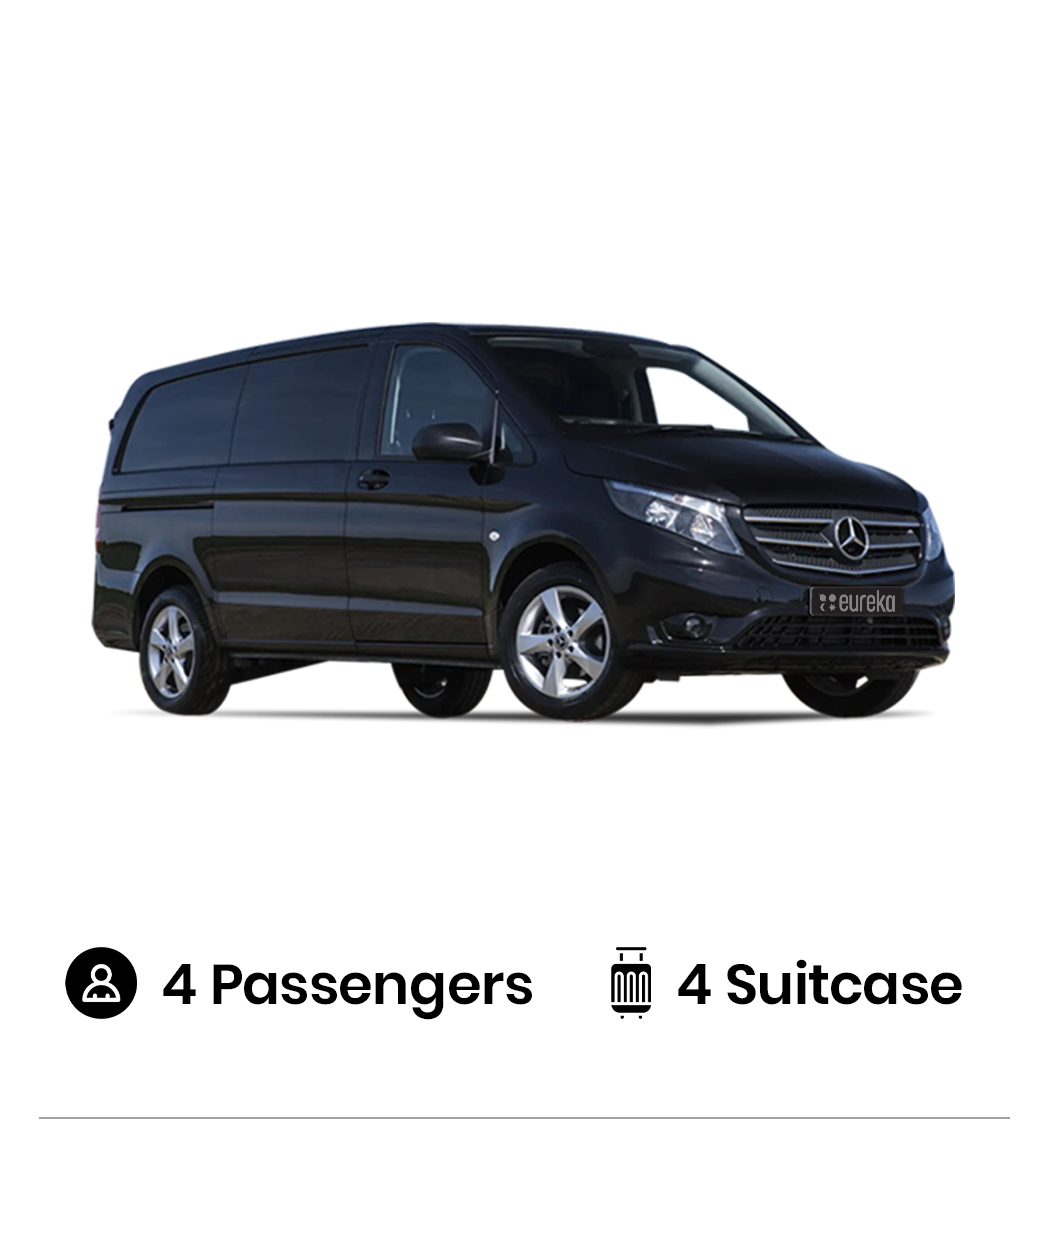 Mercedes Vito ideal for family airport transfers